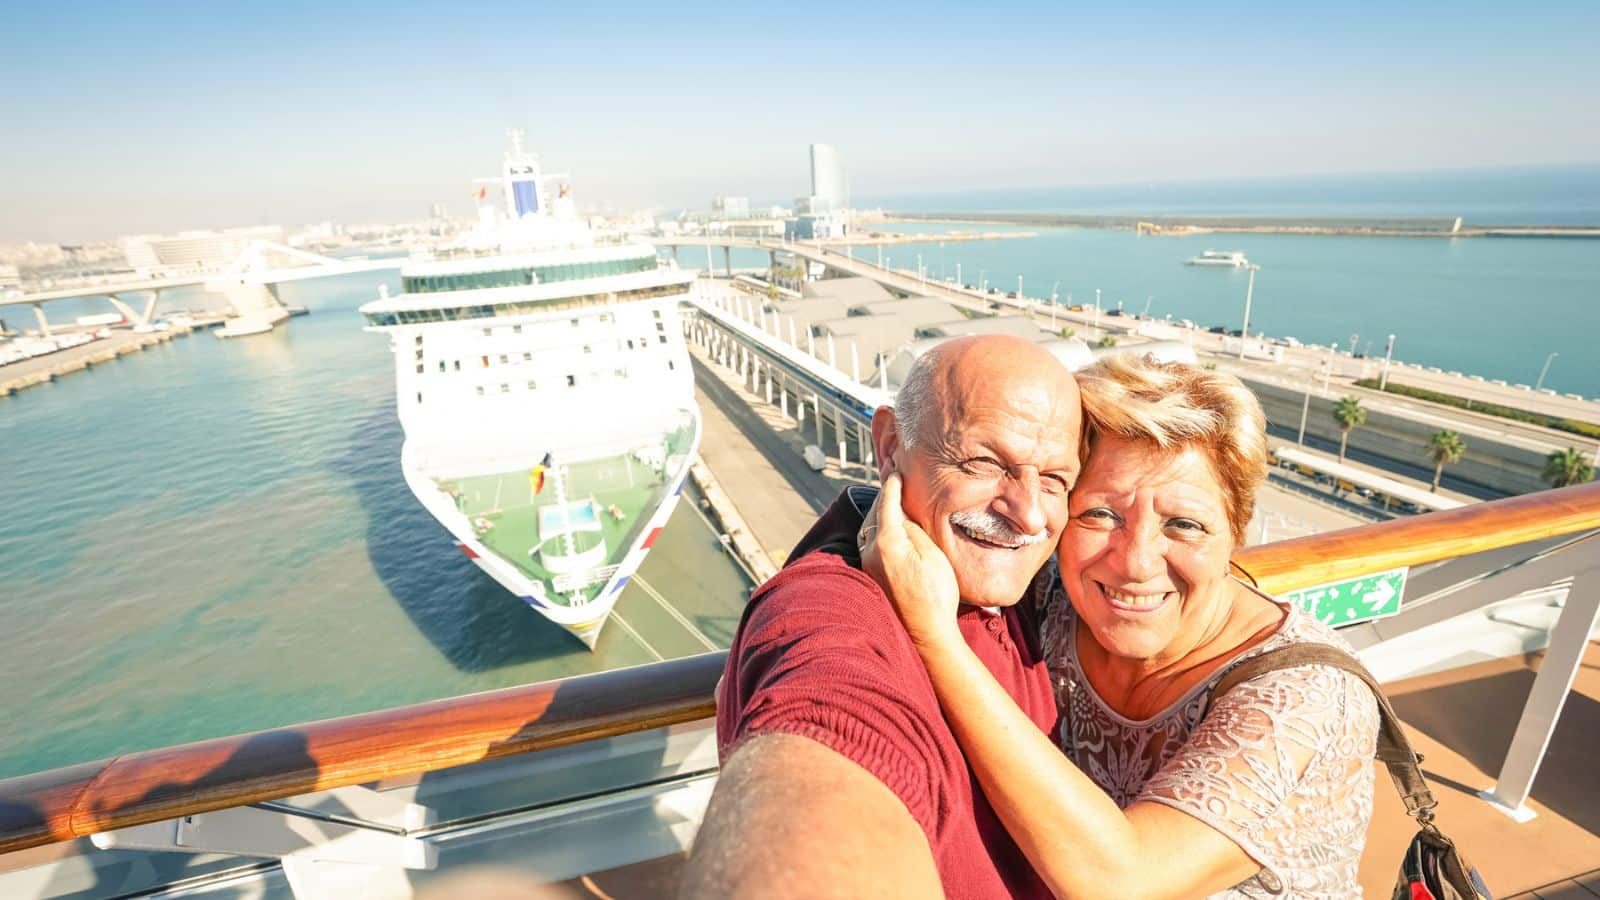 <p>Cruises are a fantastic and luxurious way to travel. These extravagant floating resorts have every amenity under the sun and take you between some of the most sought-after destinations on the planet!</p> <p>However, they’re not cheap. According to <a href="https://travel.usnews.com/features/how-much-does-a-cruise-cost">US News</a>, while many factors impact price, a seven-night cruise in the Western Mediterranean in June can set you back over $3,200 per person. And that’s only the base cost. Prices can skyrocket further when you add more perks and amenities.</p> <p>Thankfully, if you know what you’re doing, there are many ways to save money on cruise tickets! While there’s no guarantee they’ll work every time, these 17 tips should help you score the best possible deal…</p>